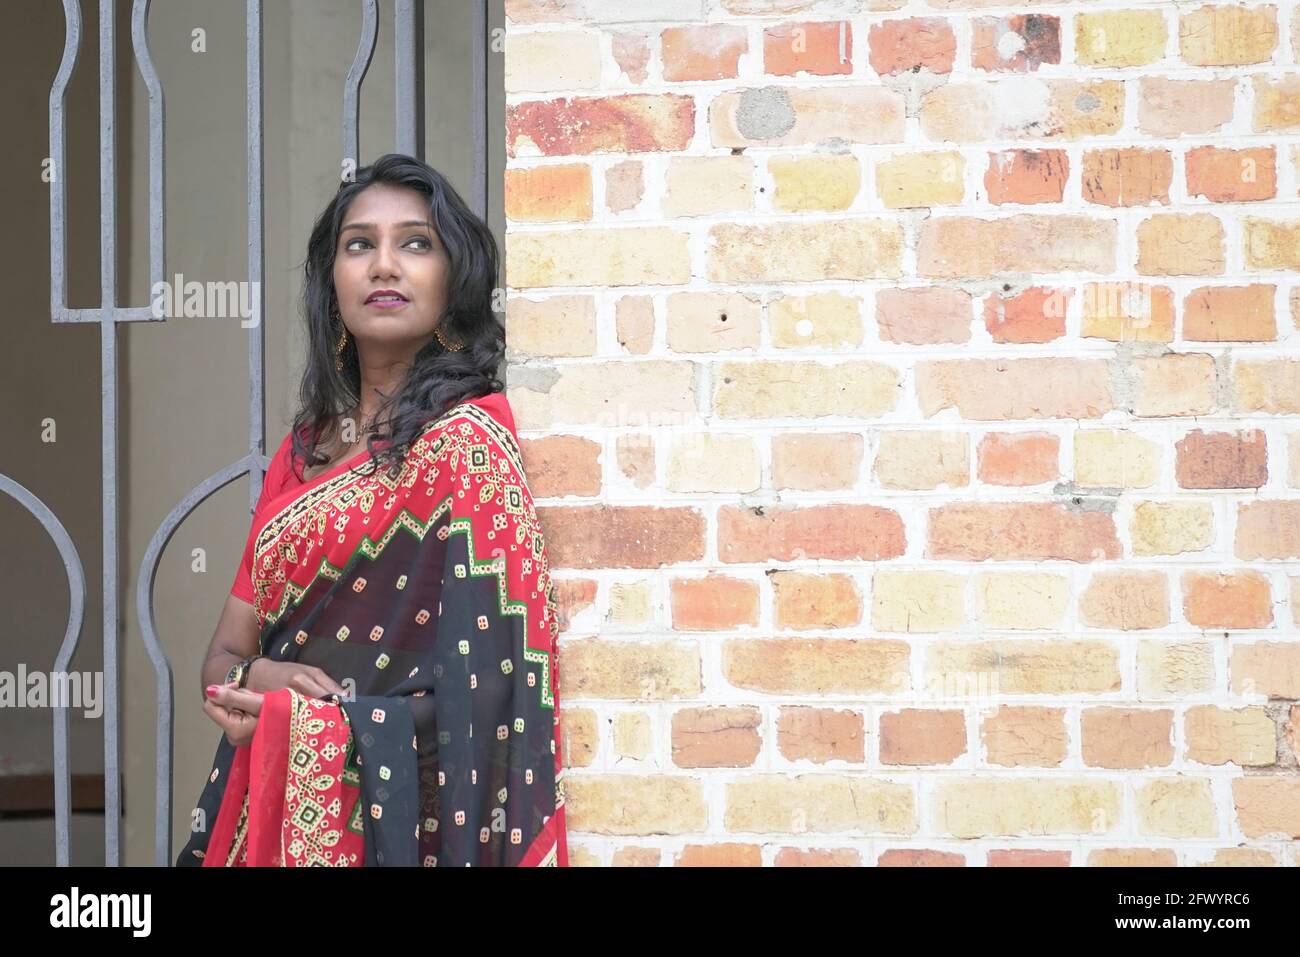 Portrait of a beautiful and smiling Indian woman wearing red saree. Standing next to brick wall, outdoor setting. Stock Photo